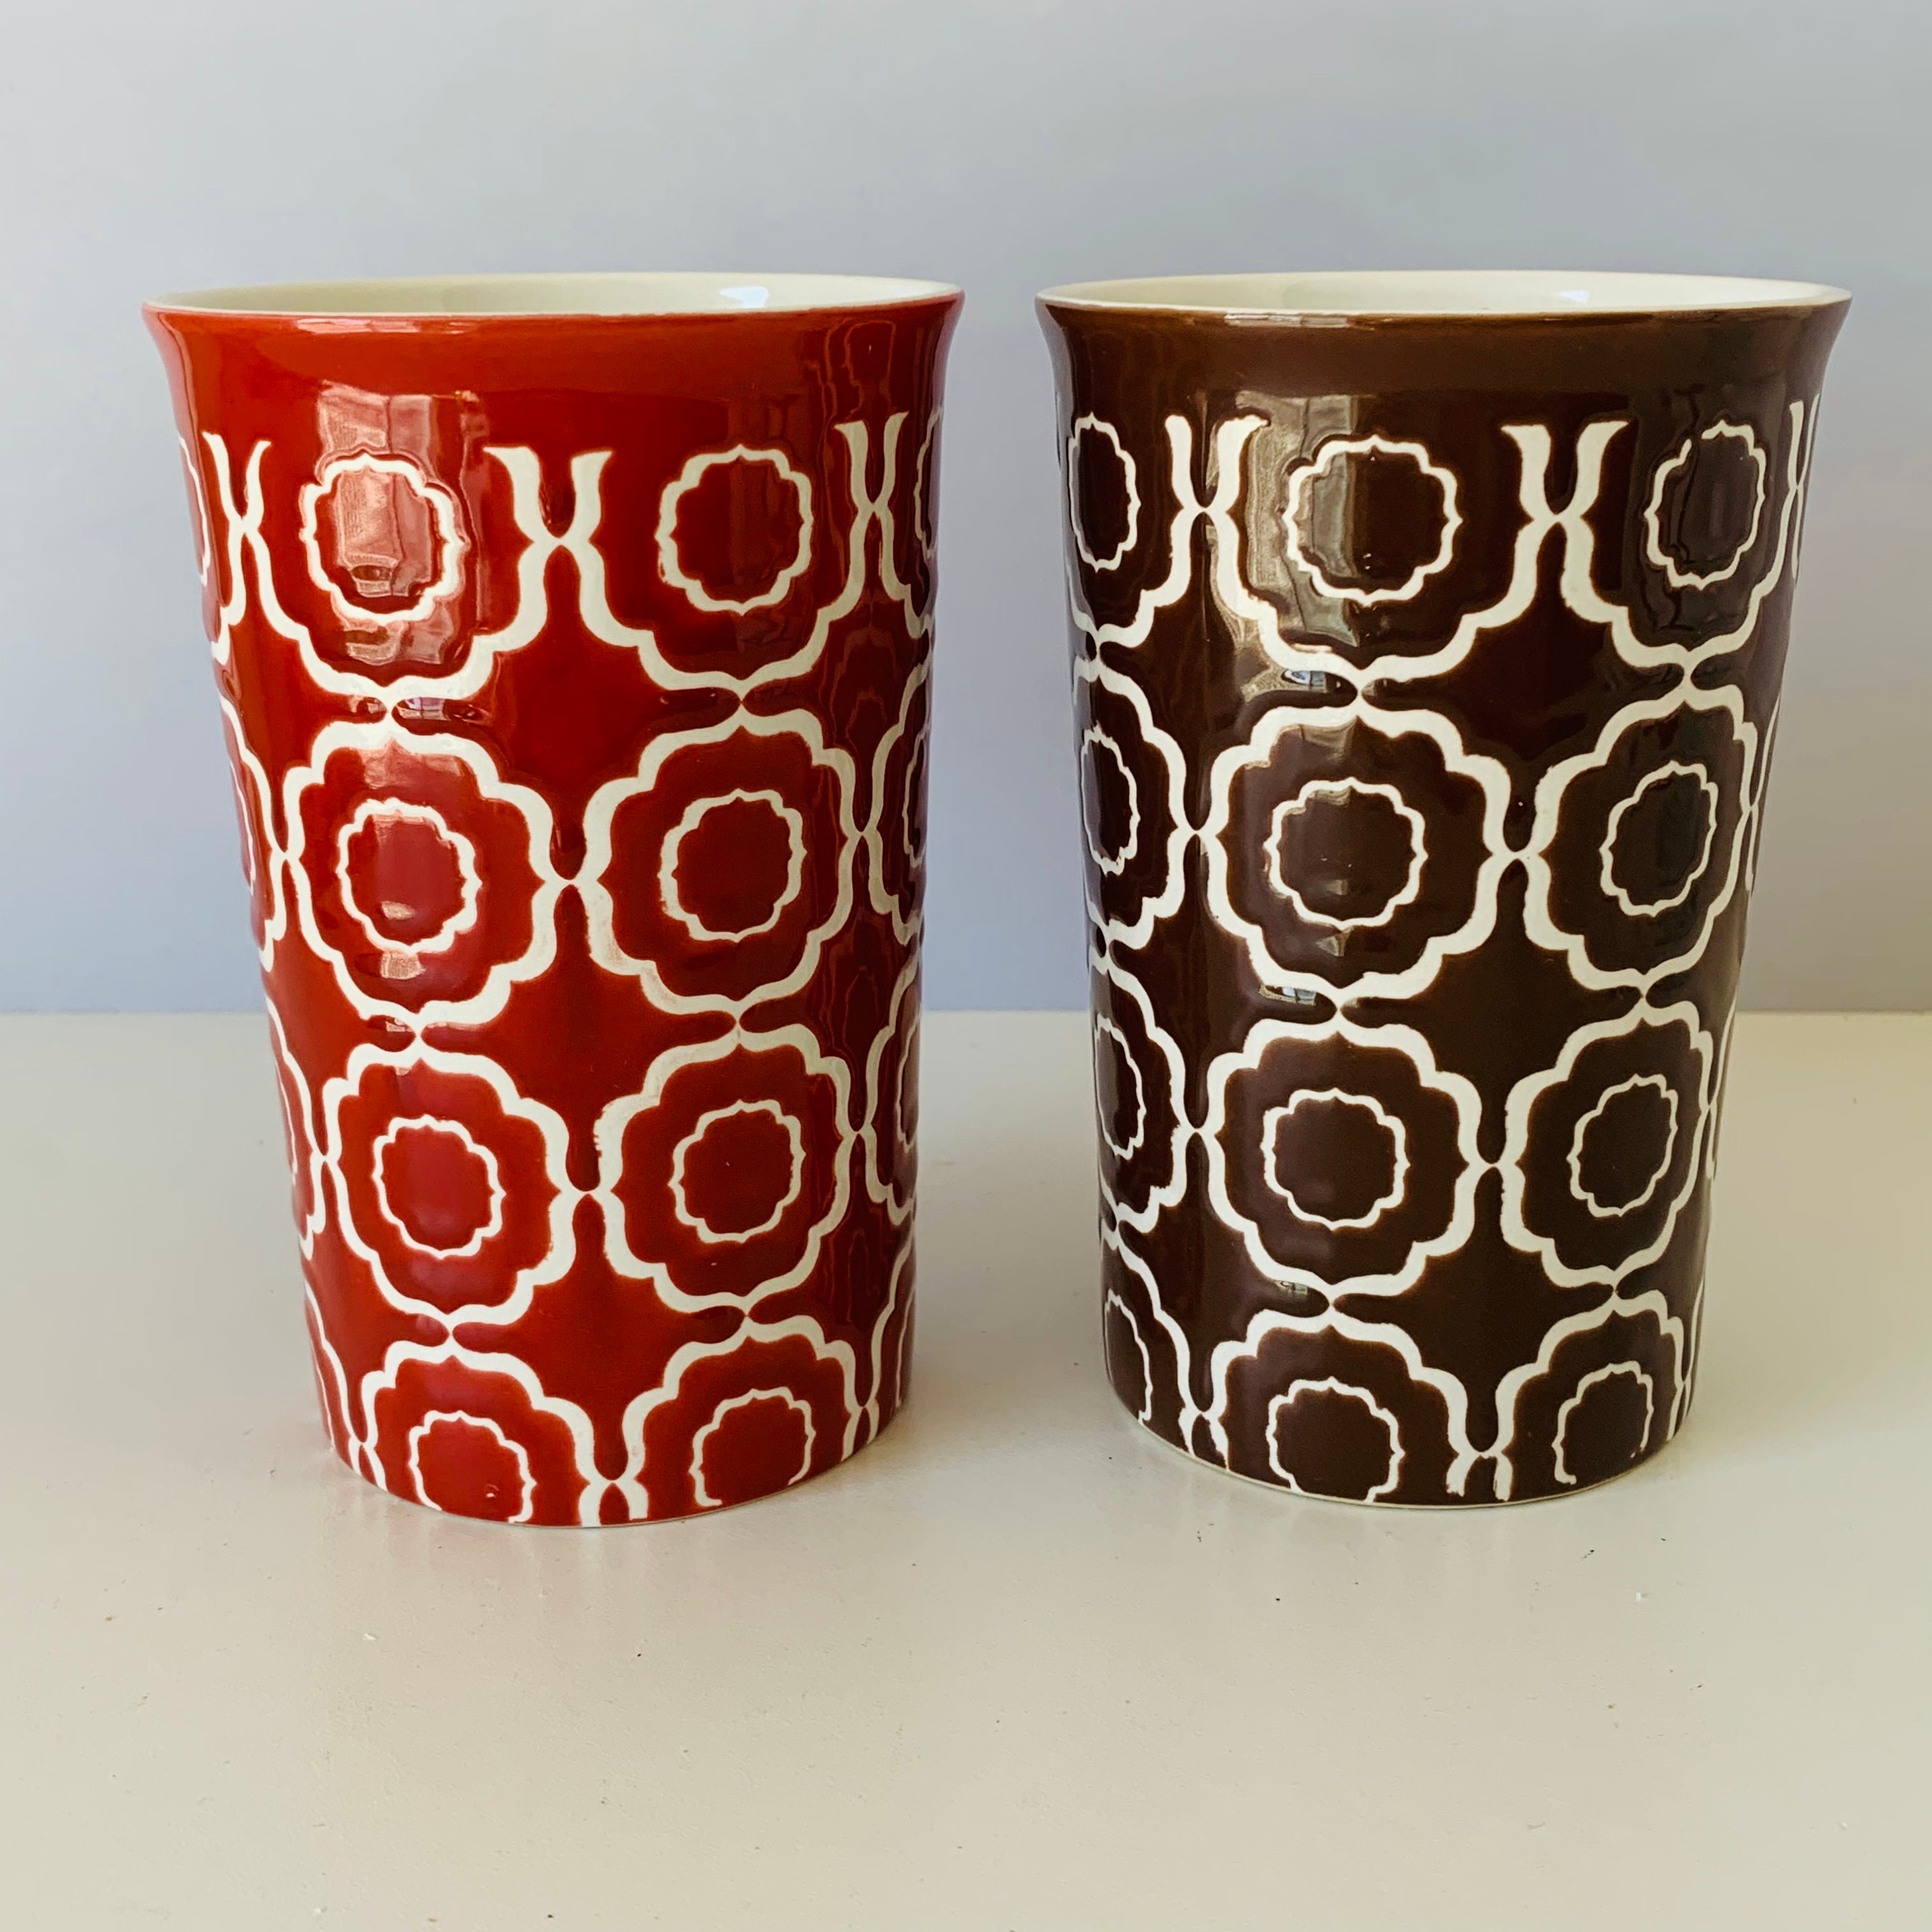 TABLETOPS MODERN TILE Embossed Ceramic Mugs, Brown Red Tall Latte Coffee  Cups, 2 Tabletop Avenue Modern Tile Handcrafted 5 Tall Cup Mug 